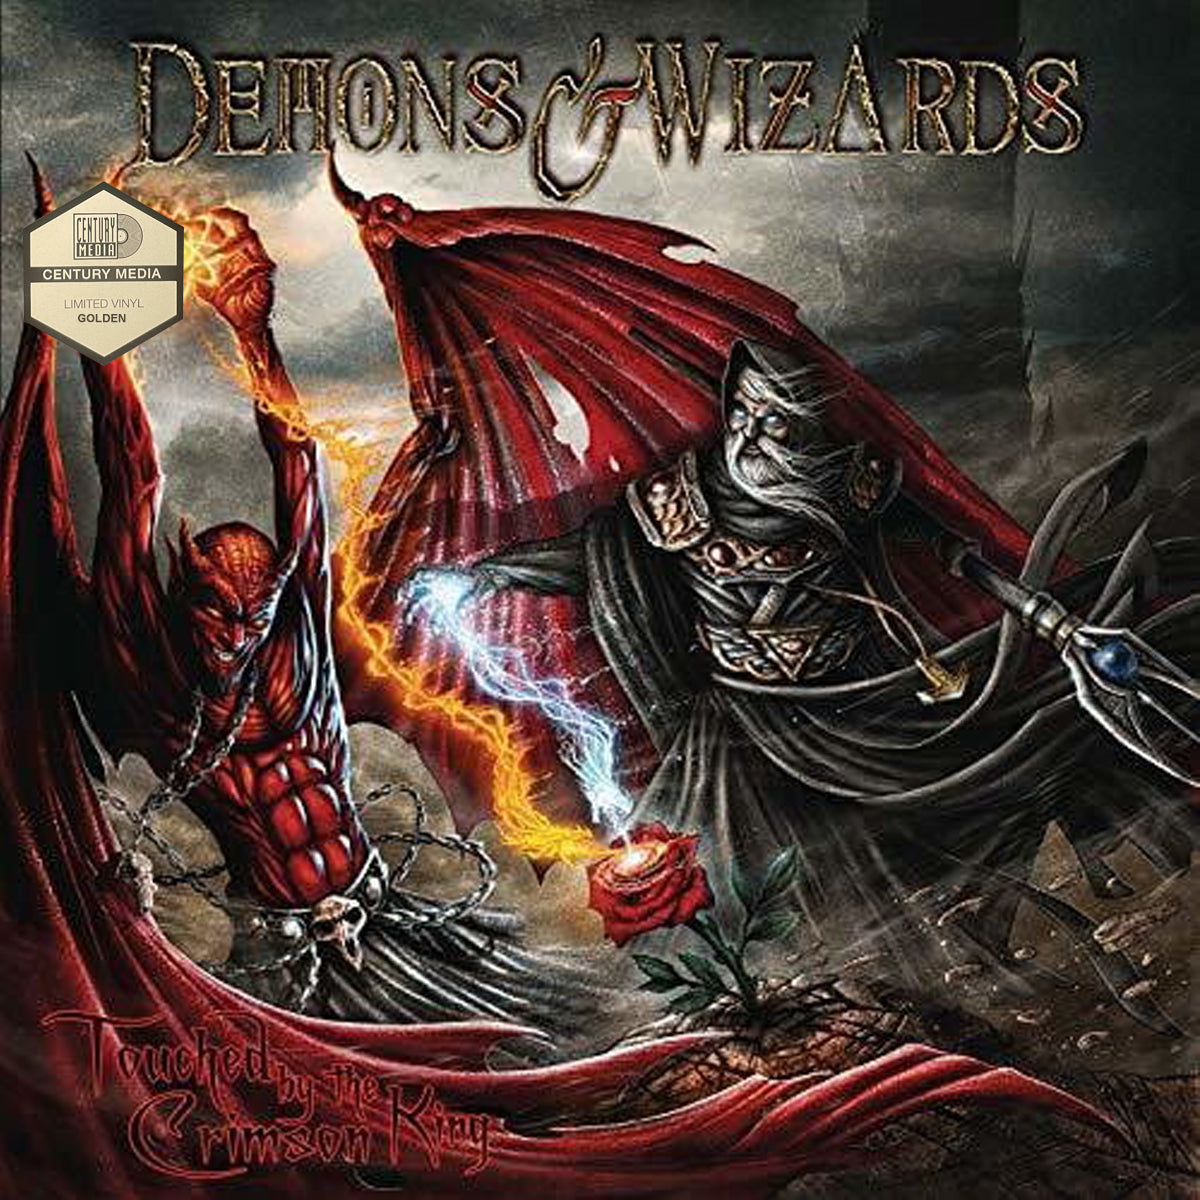 DEMONS & WIZARDS - Touched By The Crimson King Vinyl LP - Golden